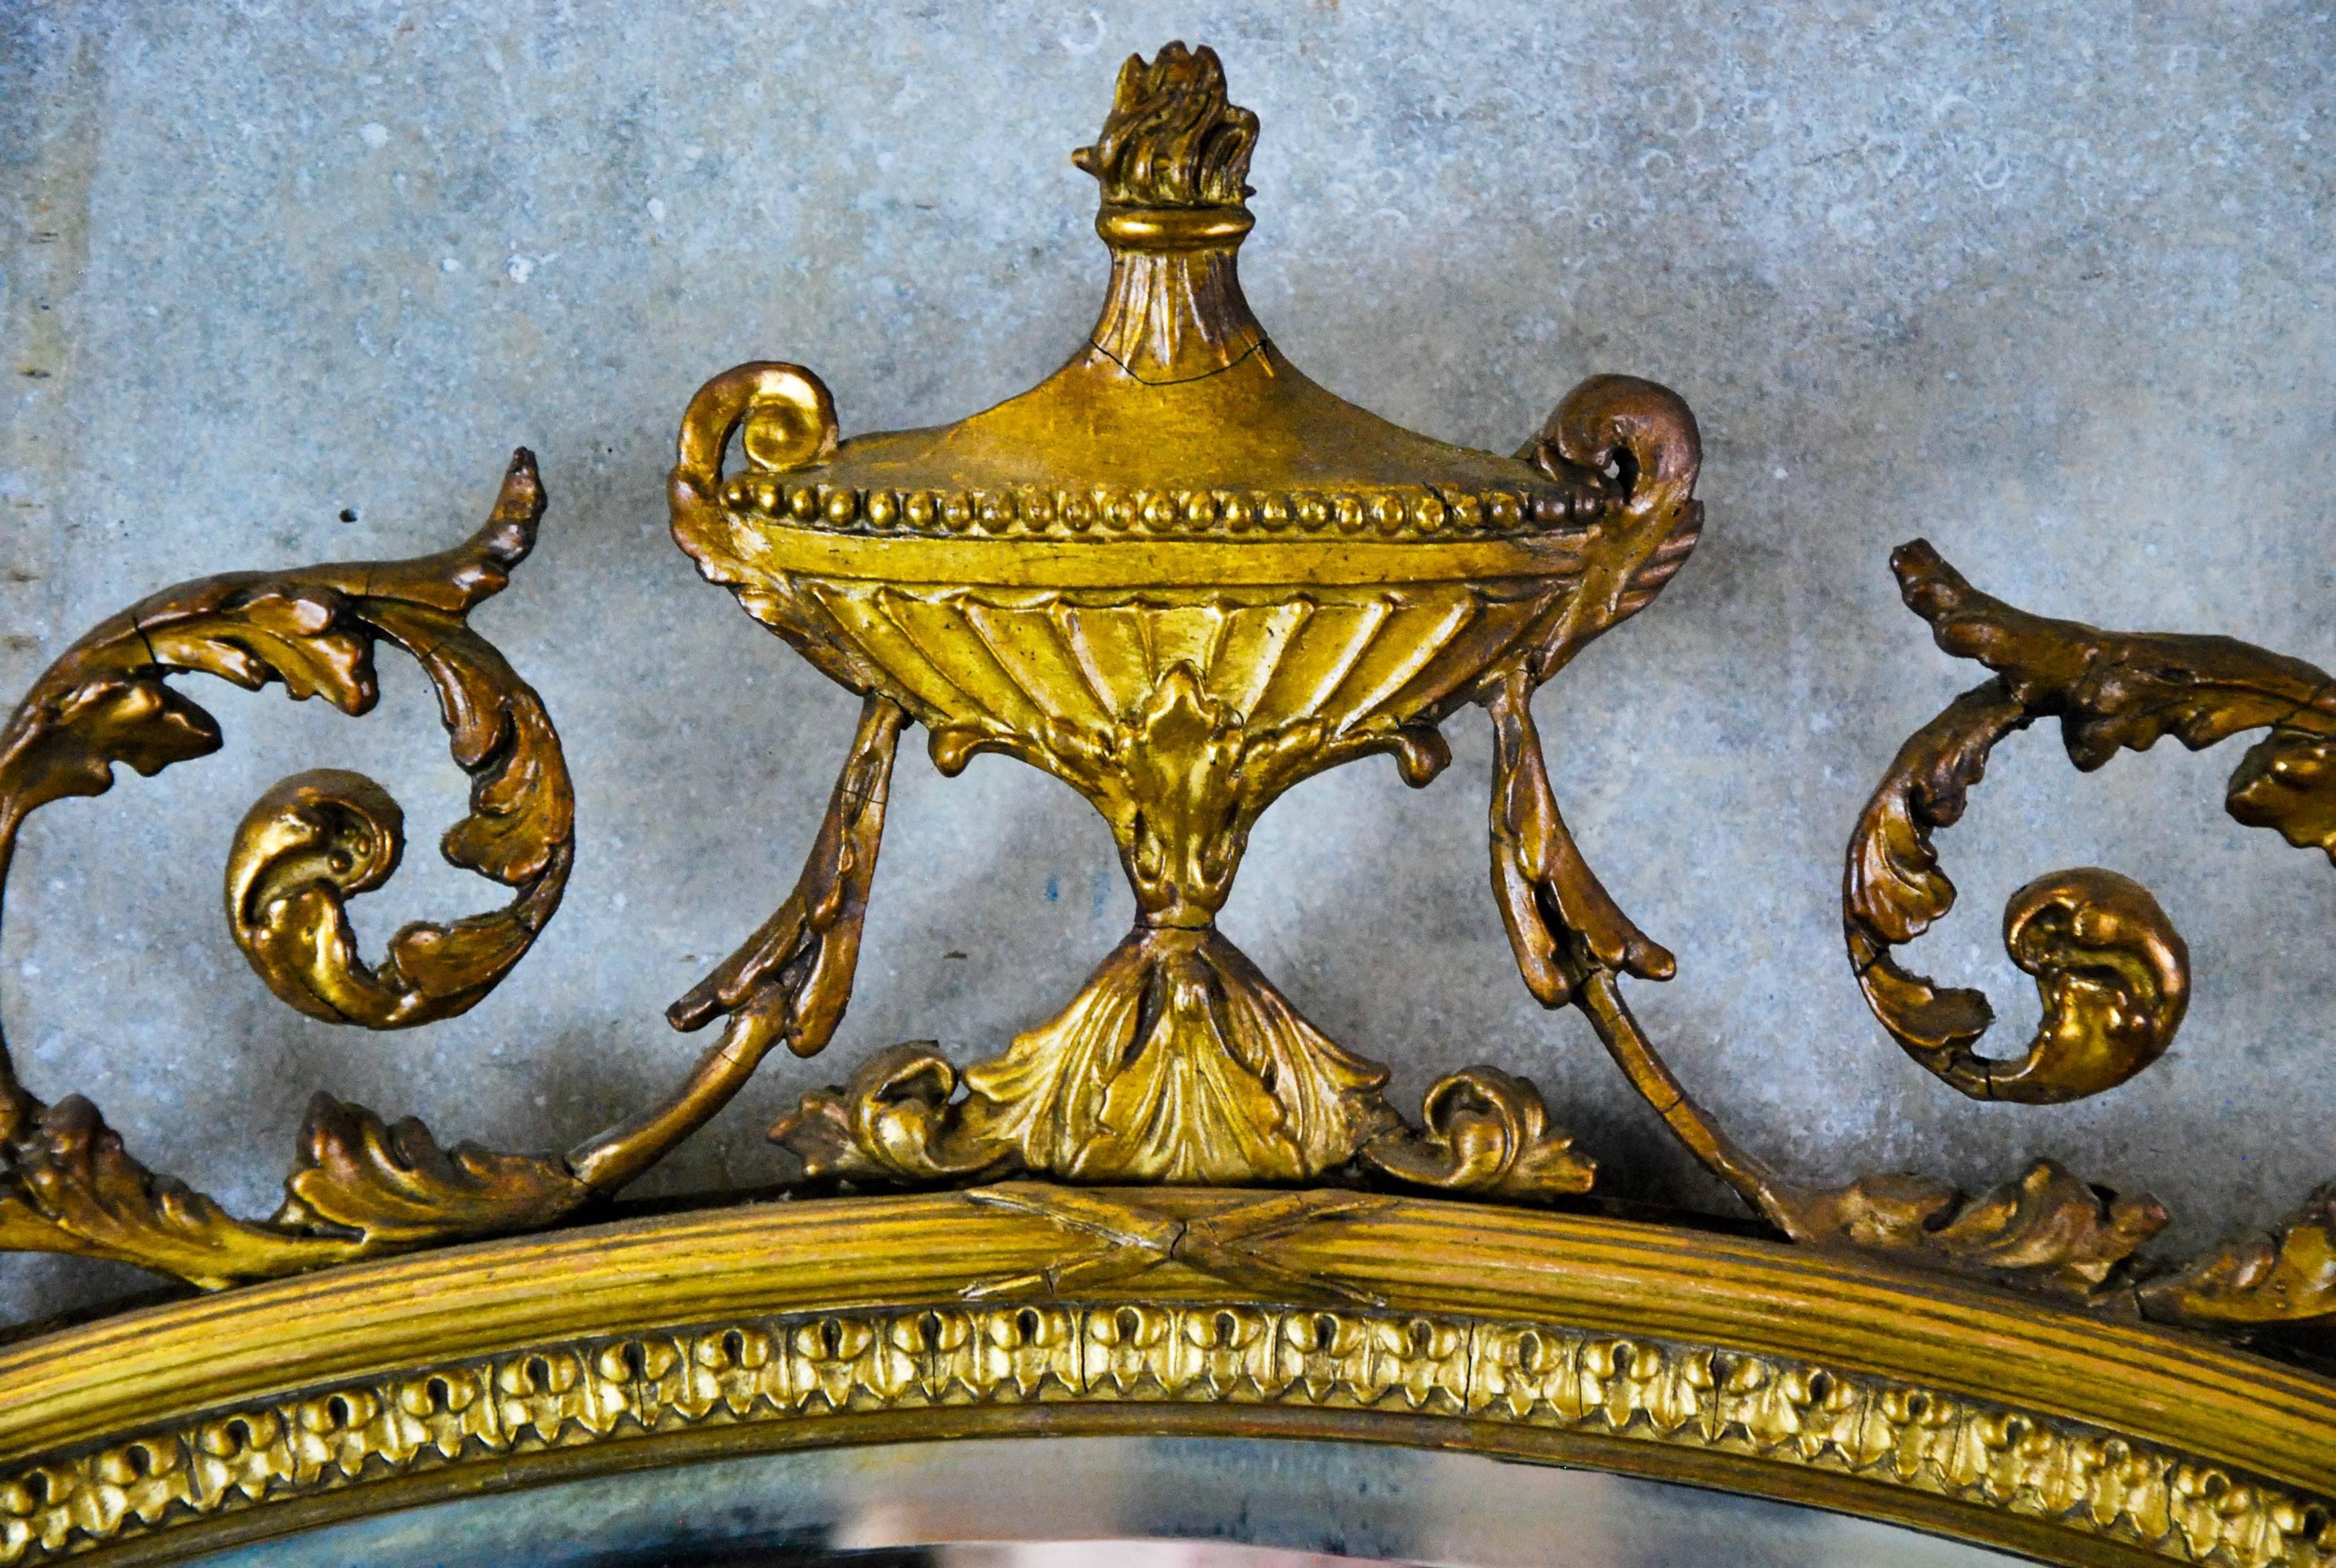 Excellent French mirror in gilded finish. Untouched.
Recently acquired from a private collection.